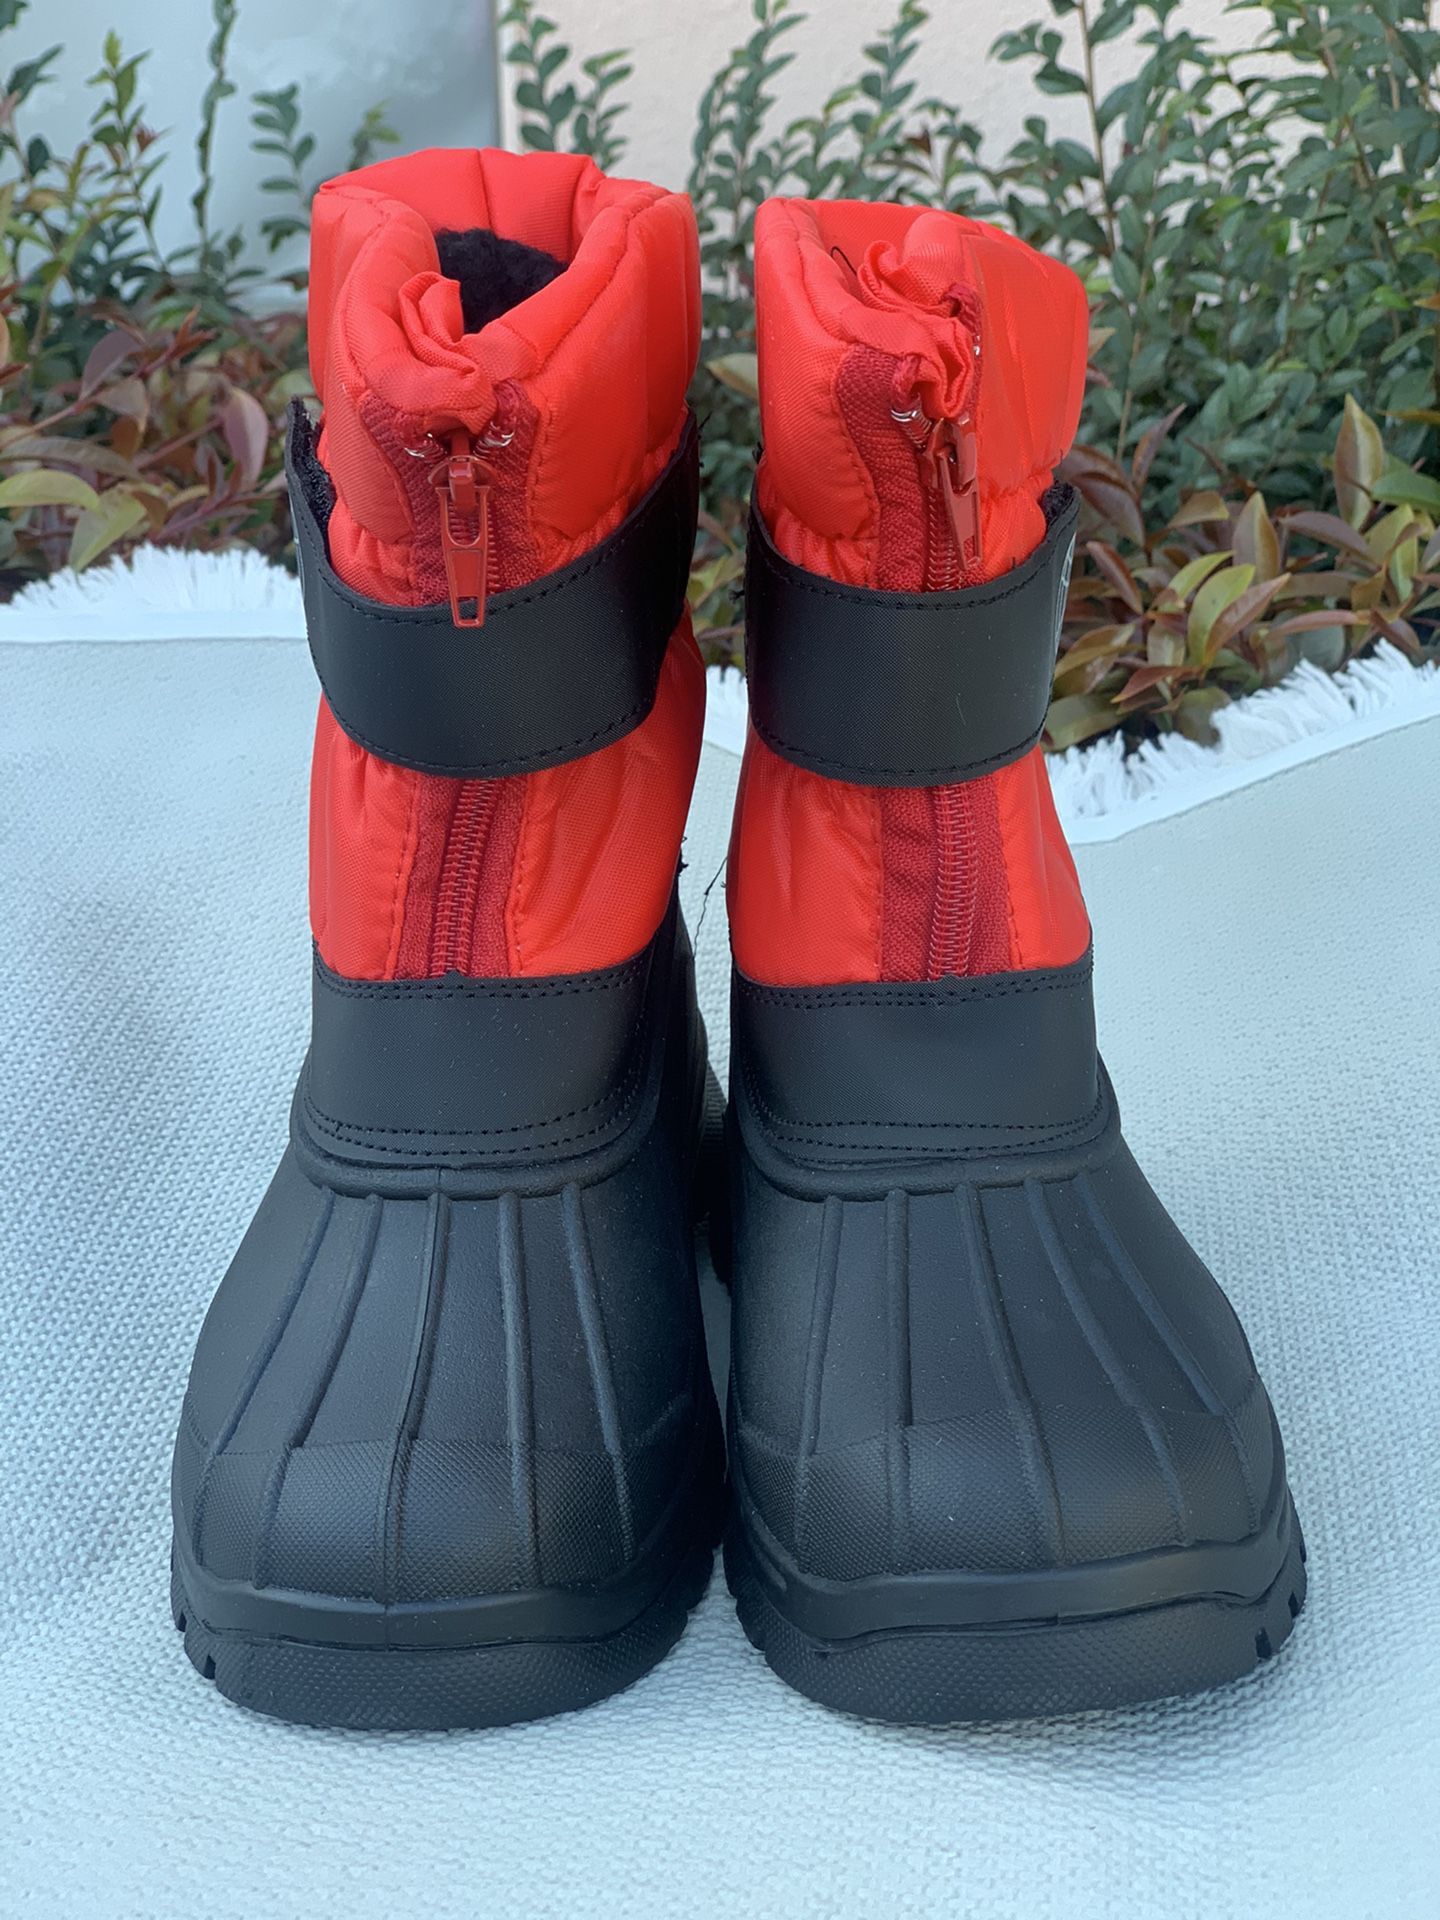 Snow boots for kids sizes 1,2,3,4